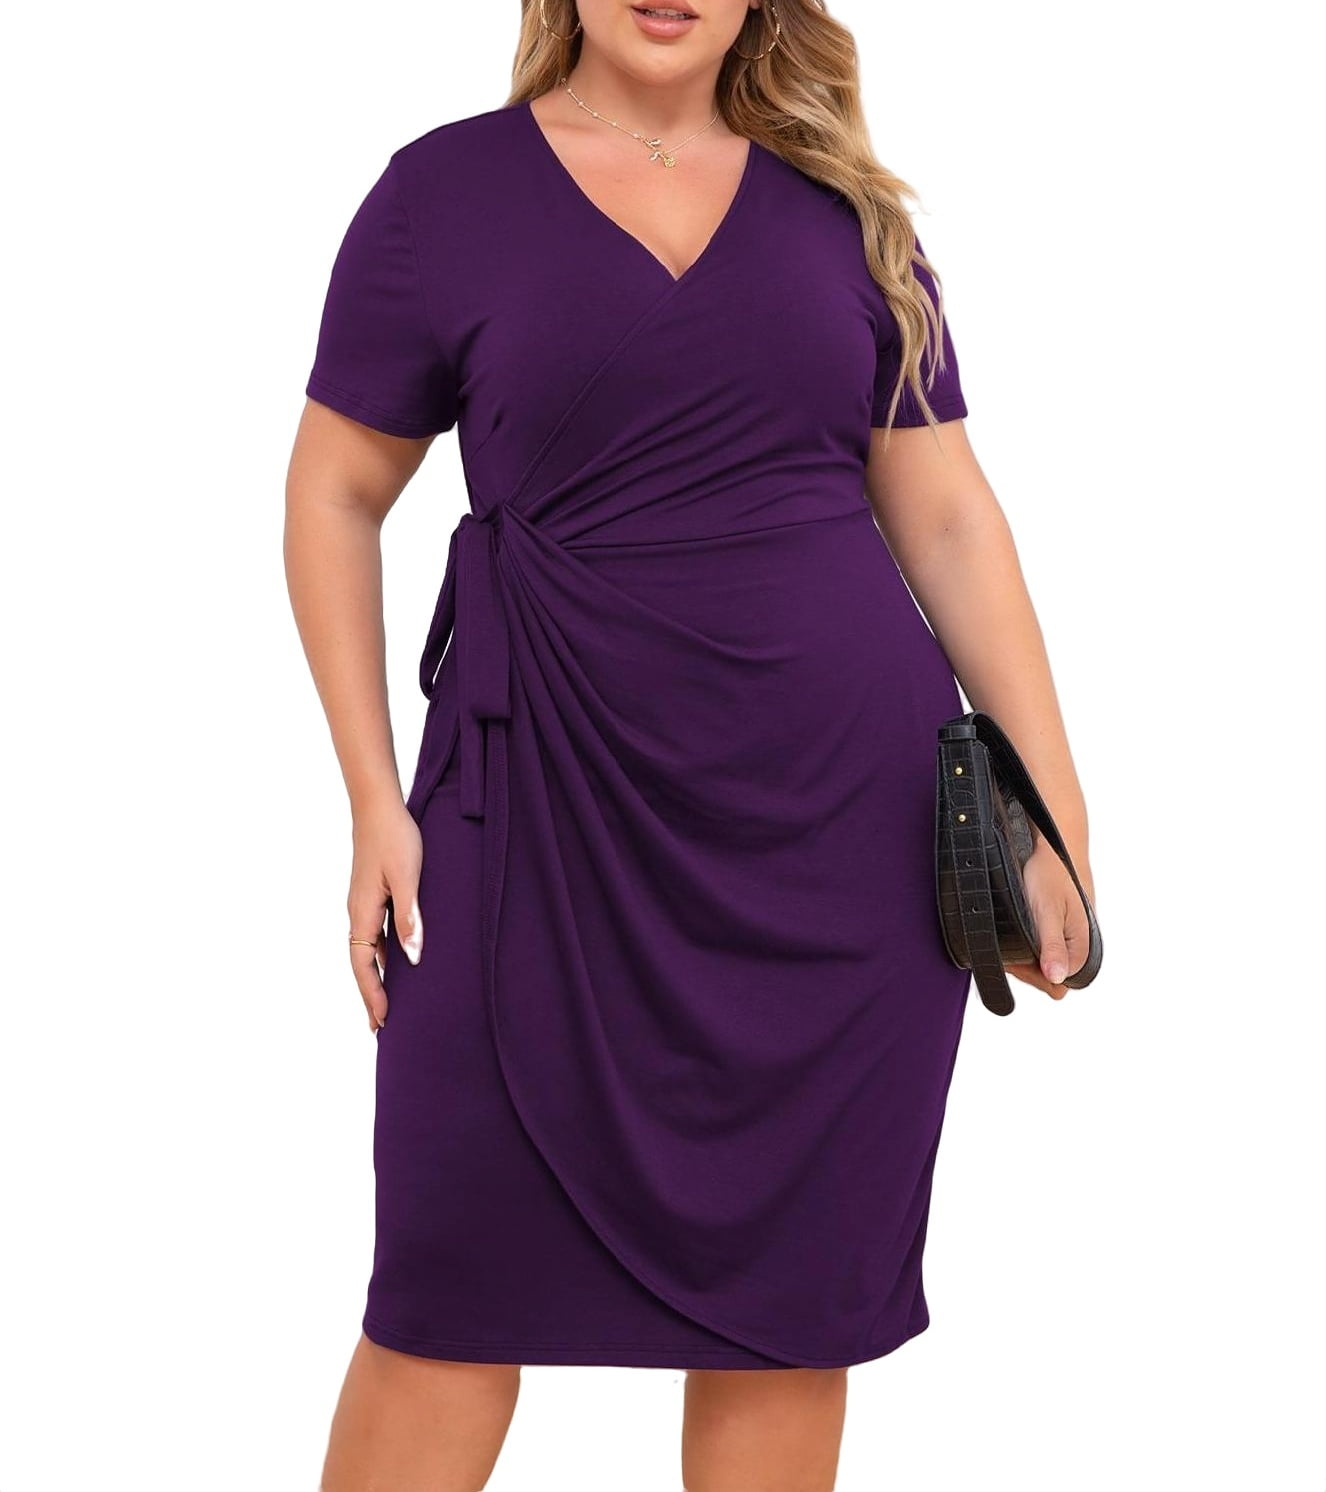 SheIn Women's Solid Party Dresses Plus Size Short Sleeve High